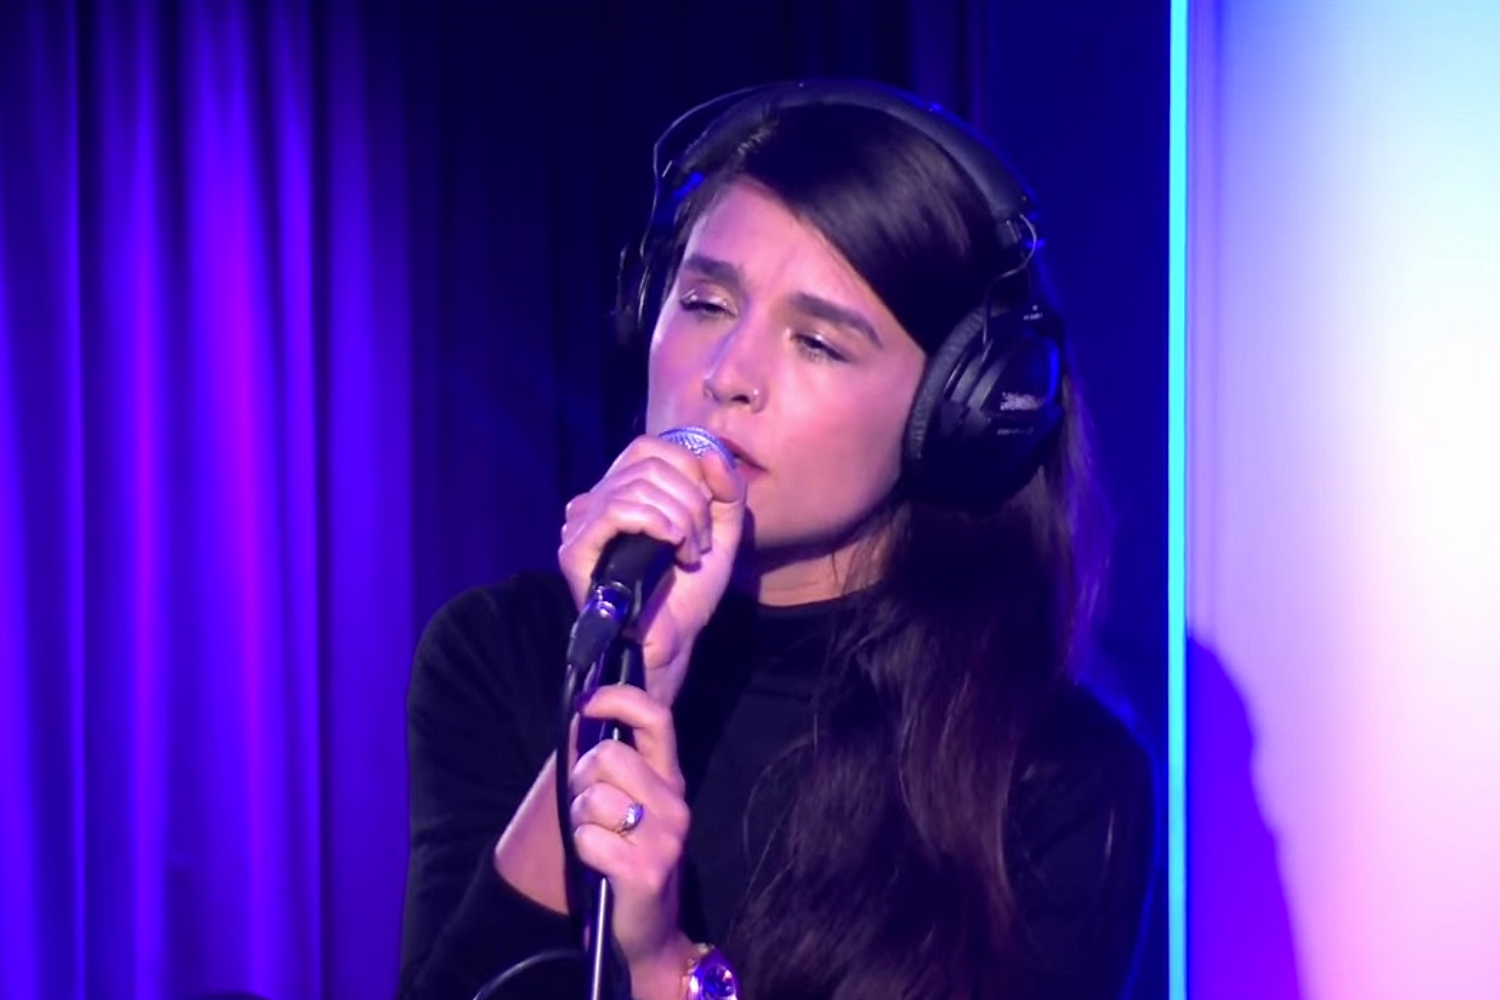 Jessie Ware takes on Labrinth’s ‘Jealous’ for Radio 1